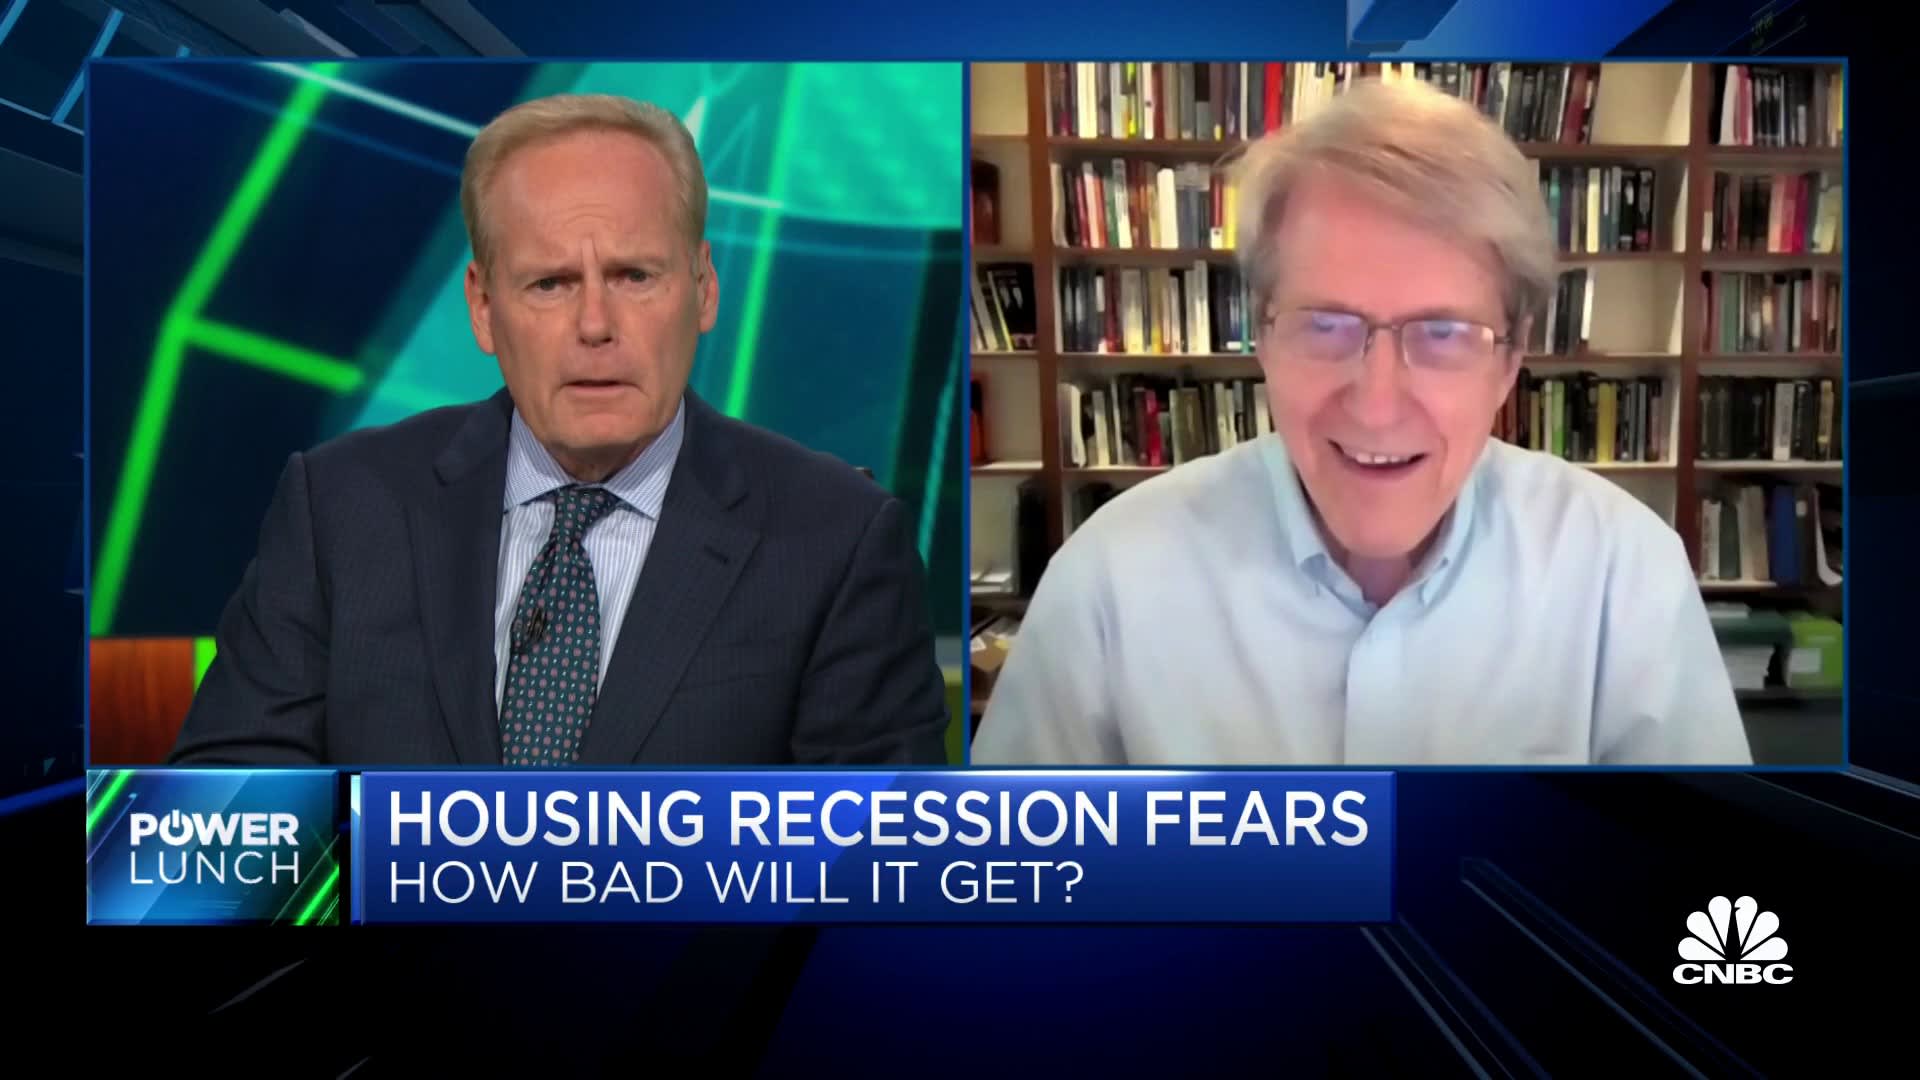 We might be looking at declining home prices nationally, says Yale's Robert Shiller